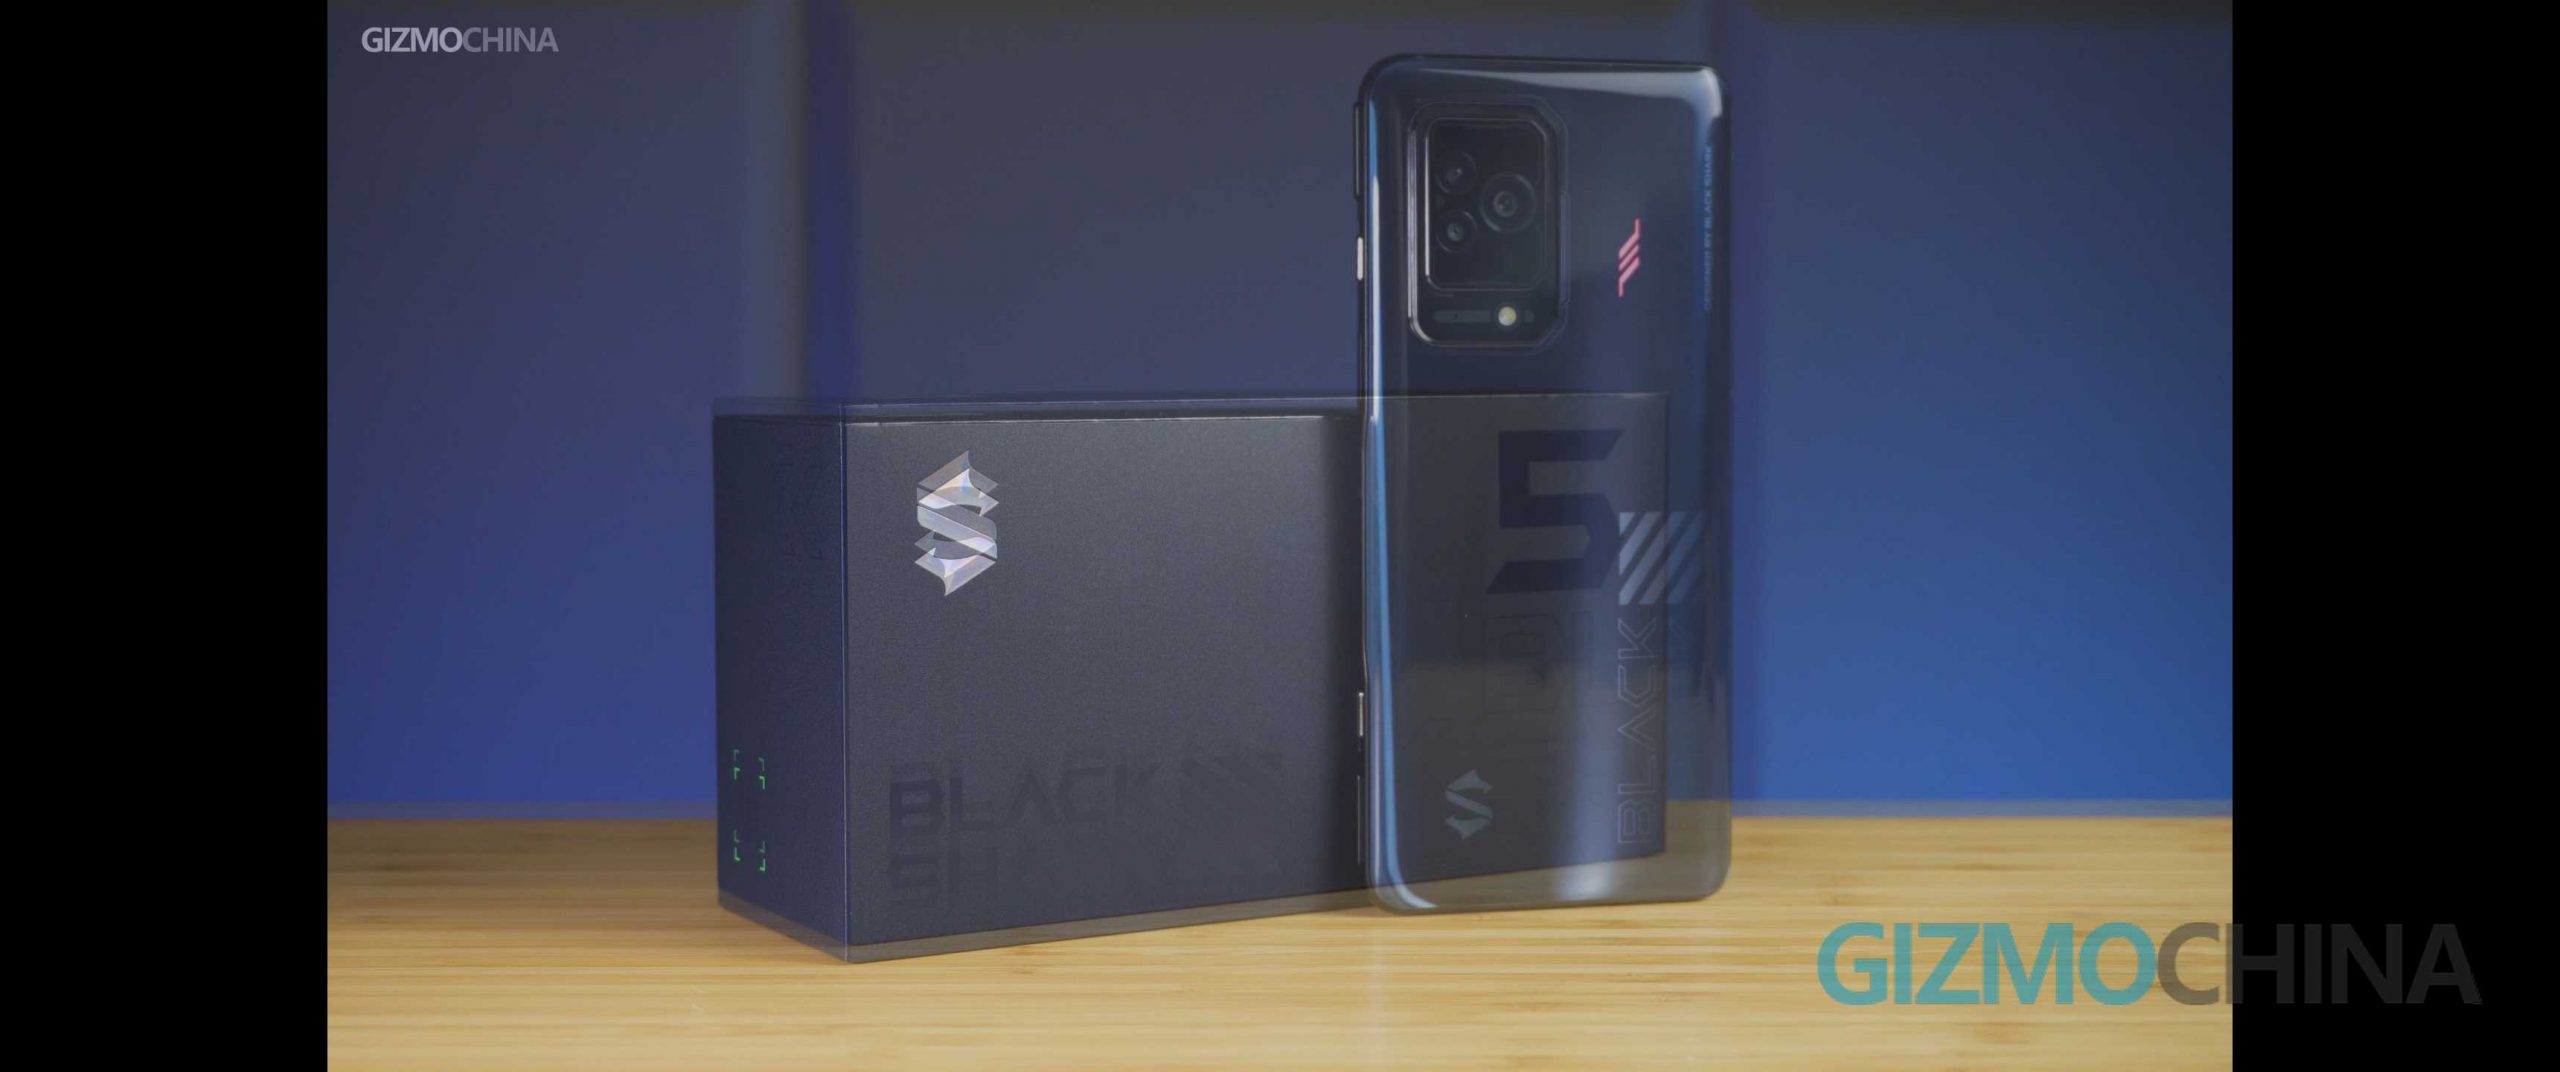 Black Shark 5 Pro review: A level up